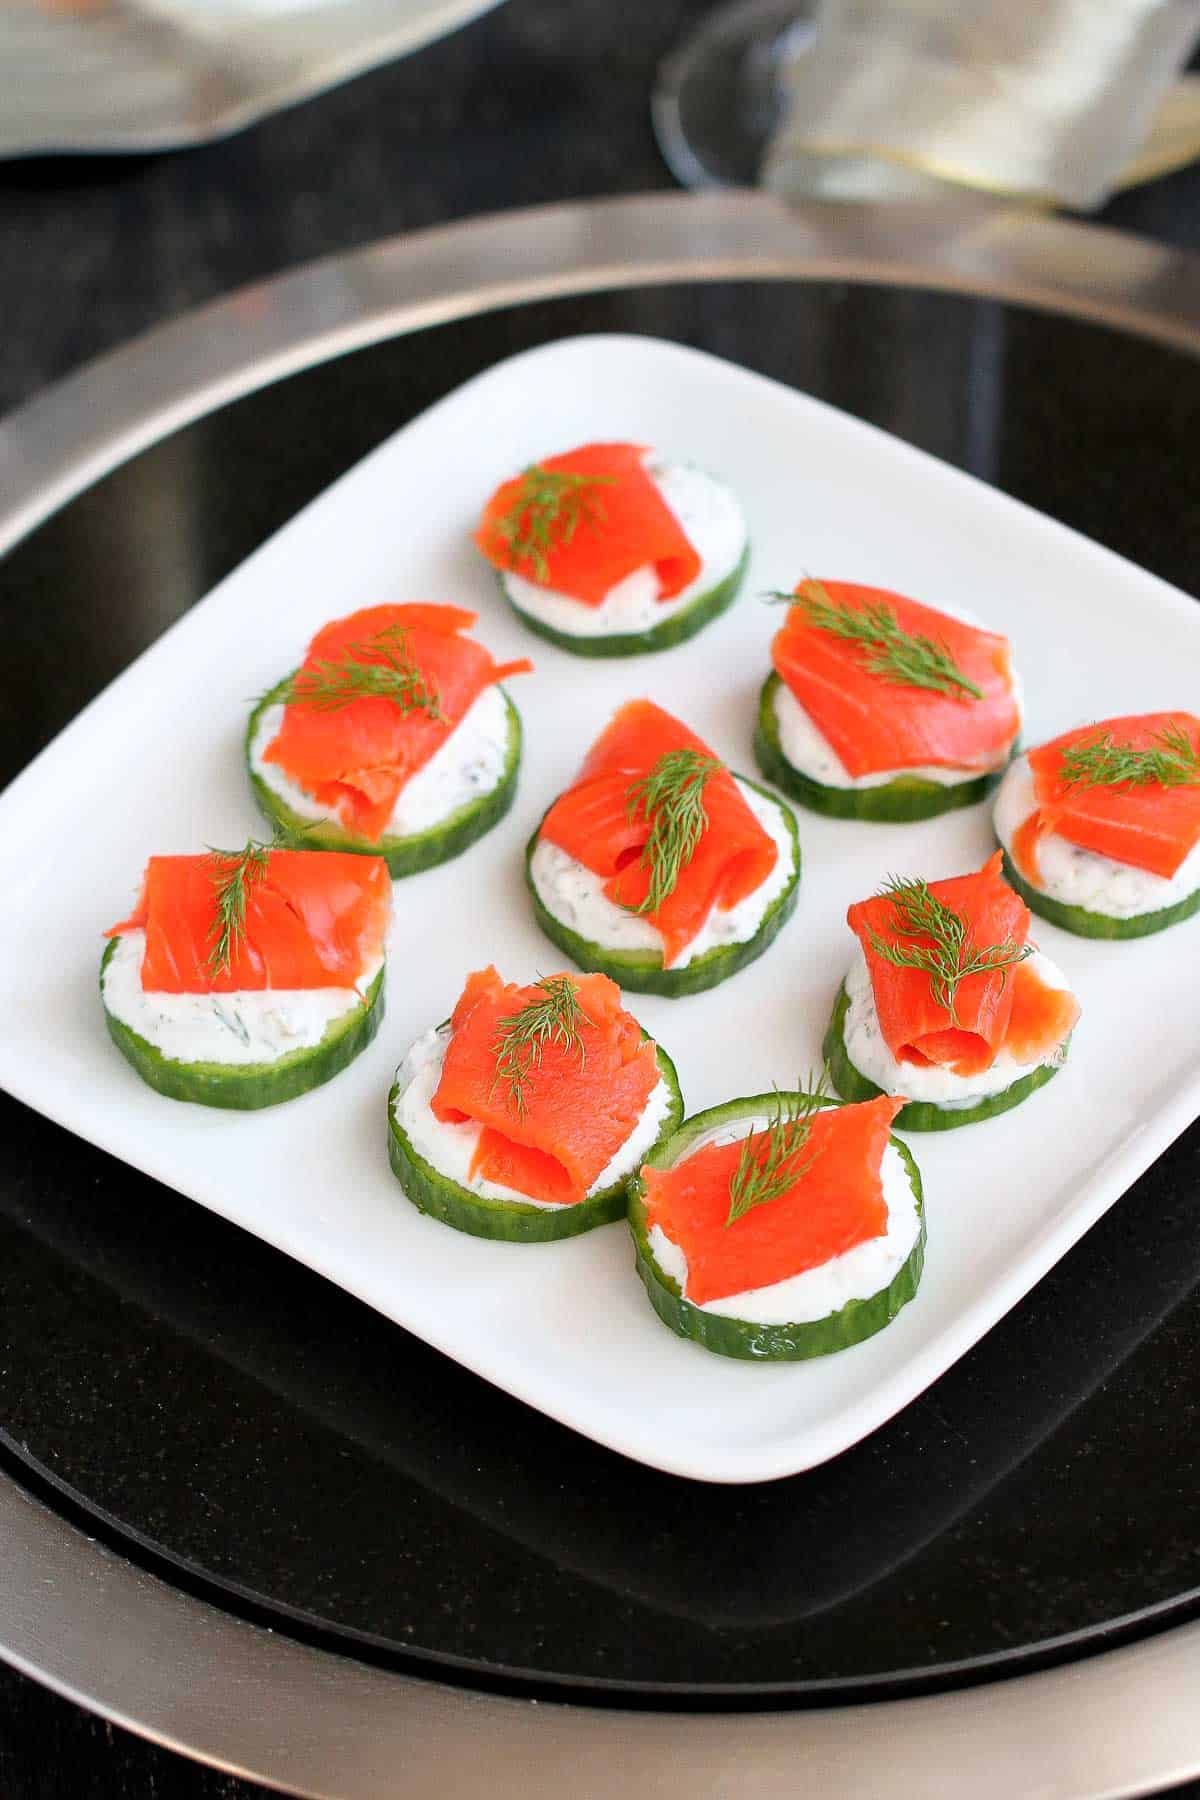 This easy smoked salmon and cucumber appetizer recipe is not only smoky, salty and fresh, but low in calories as well. | Recipes smoked salmon | Holiday appetizers | New Year's Eve